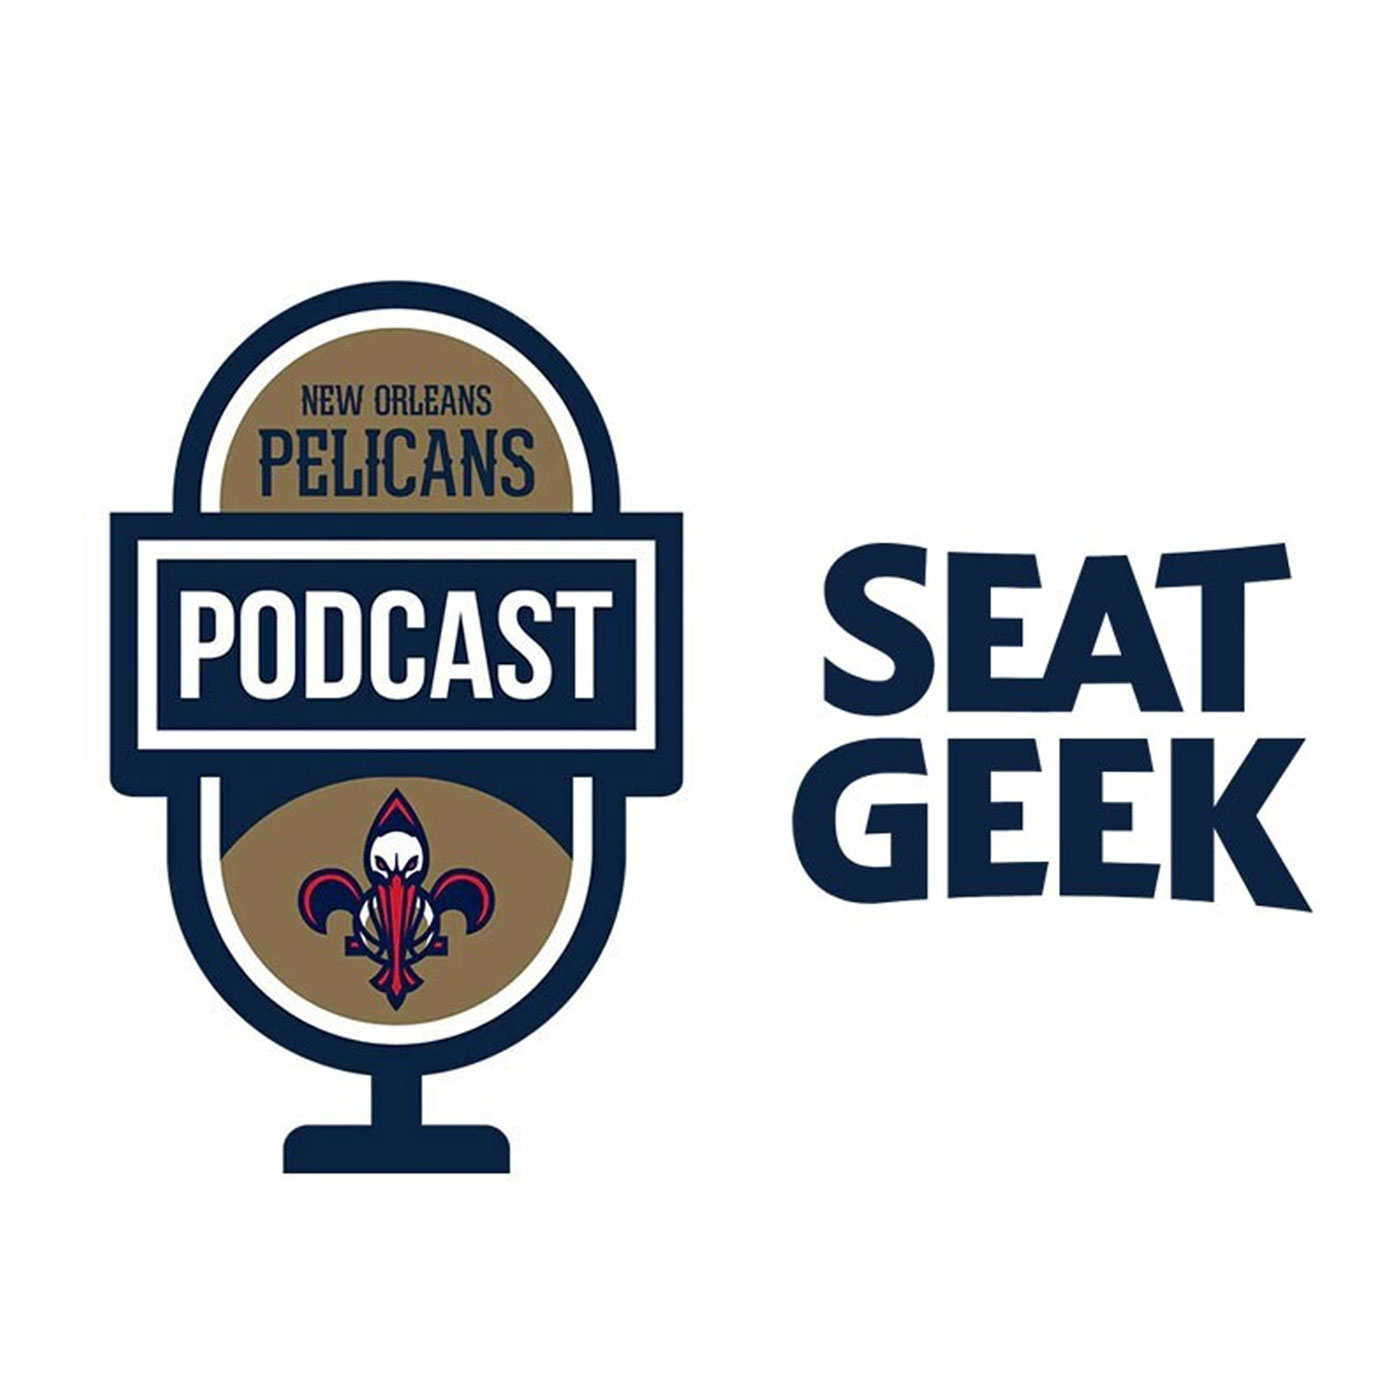 David Wesley on the New Orleans Pelicans Podcast presented by SeatGeek - December 22, 2021